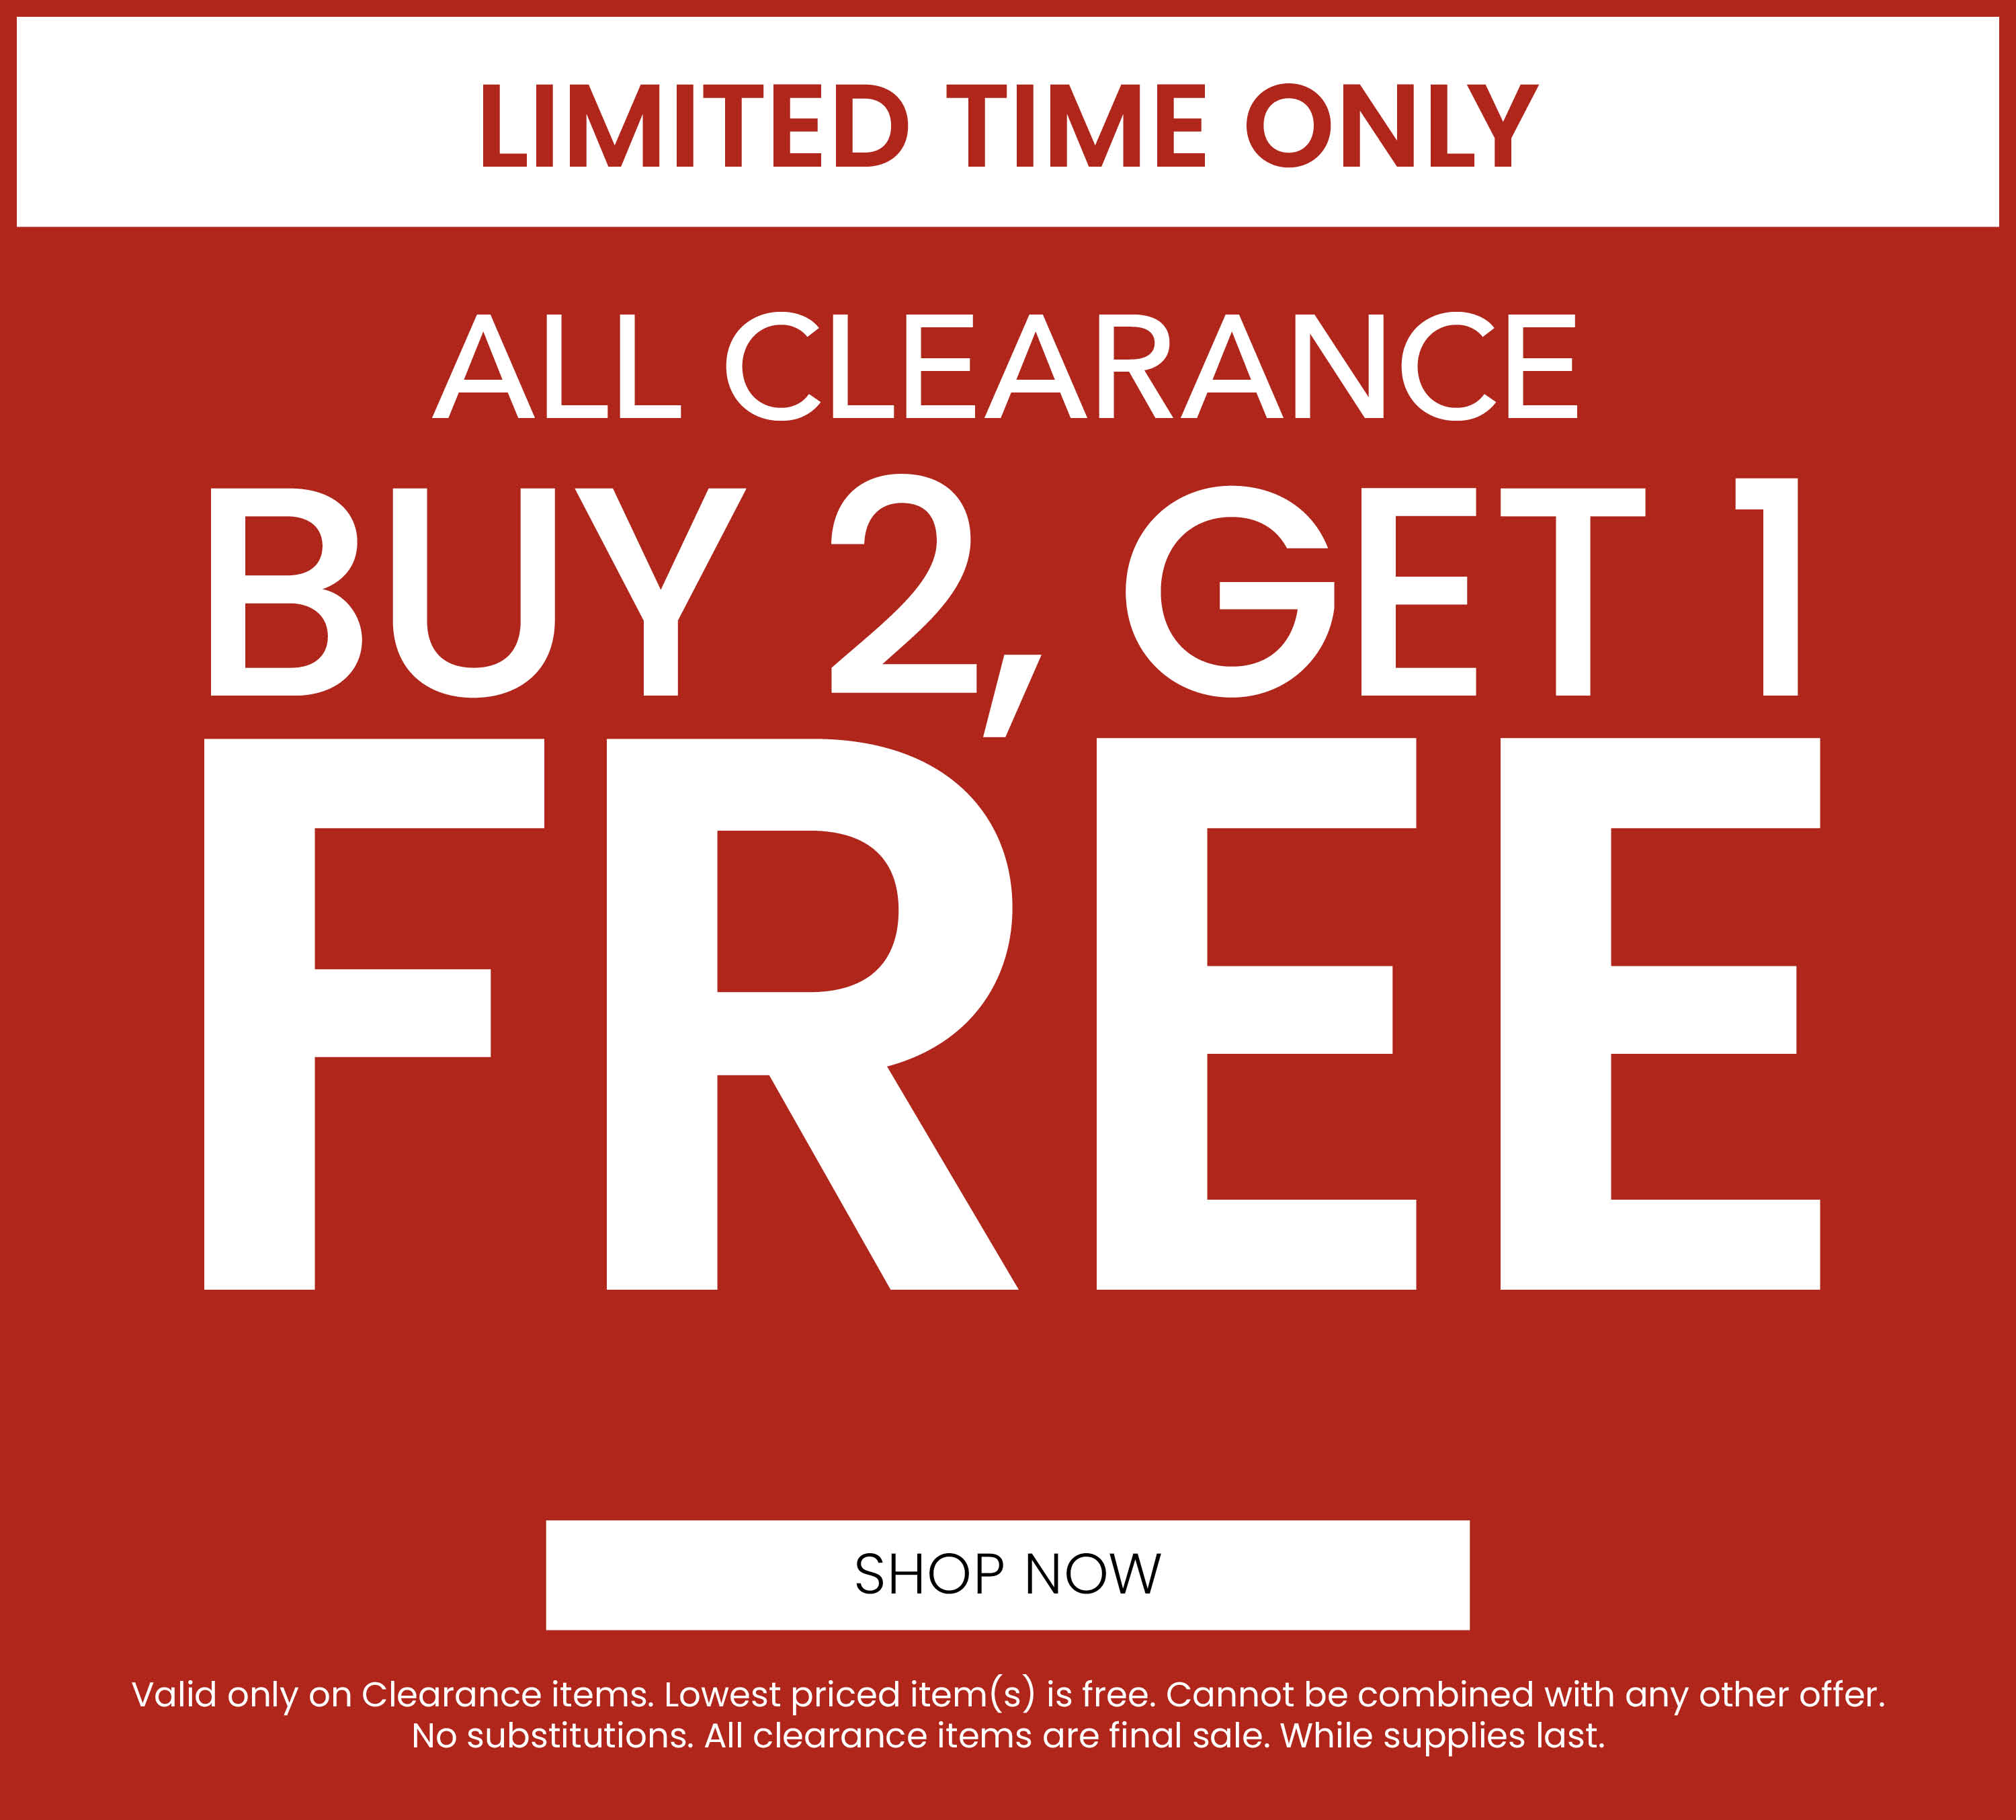 All Clearance Buy 2, Get 1 Free. Shop Now.